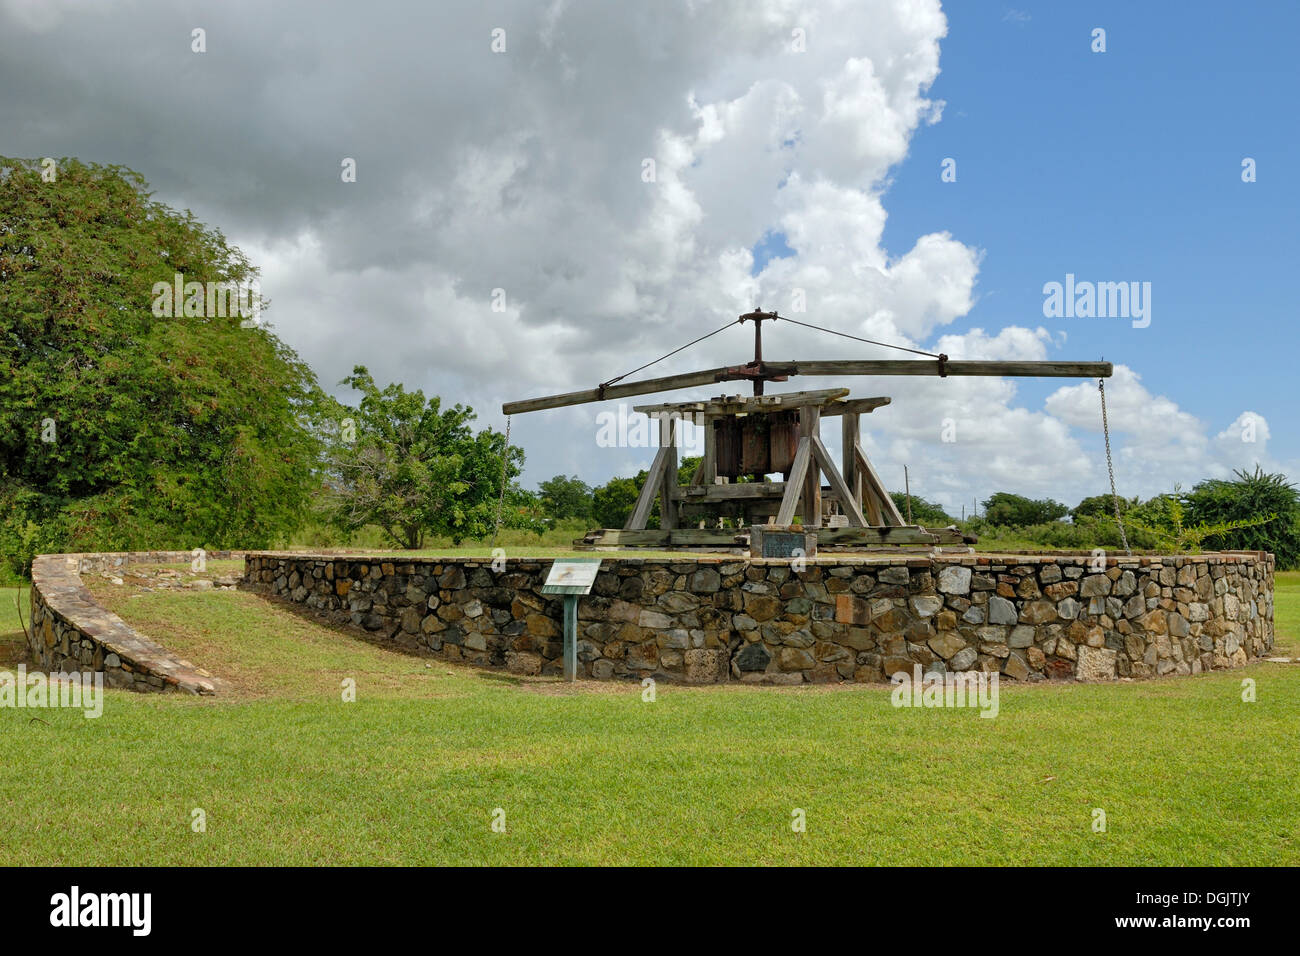 Historical sugar cane press operated by draft animals, Whim Estate, island of St. Croix, U.S. Virgin Islands, USA Stock Photo